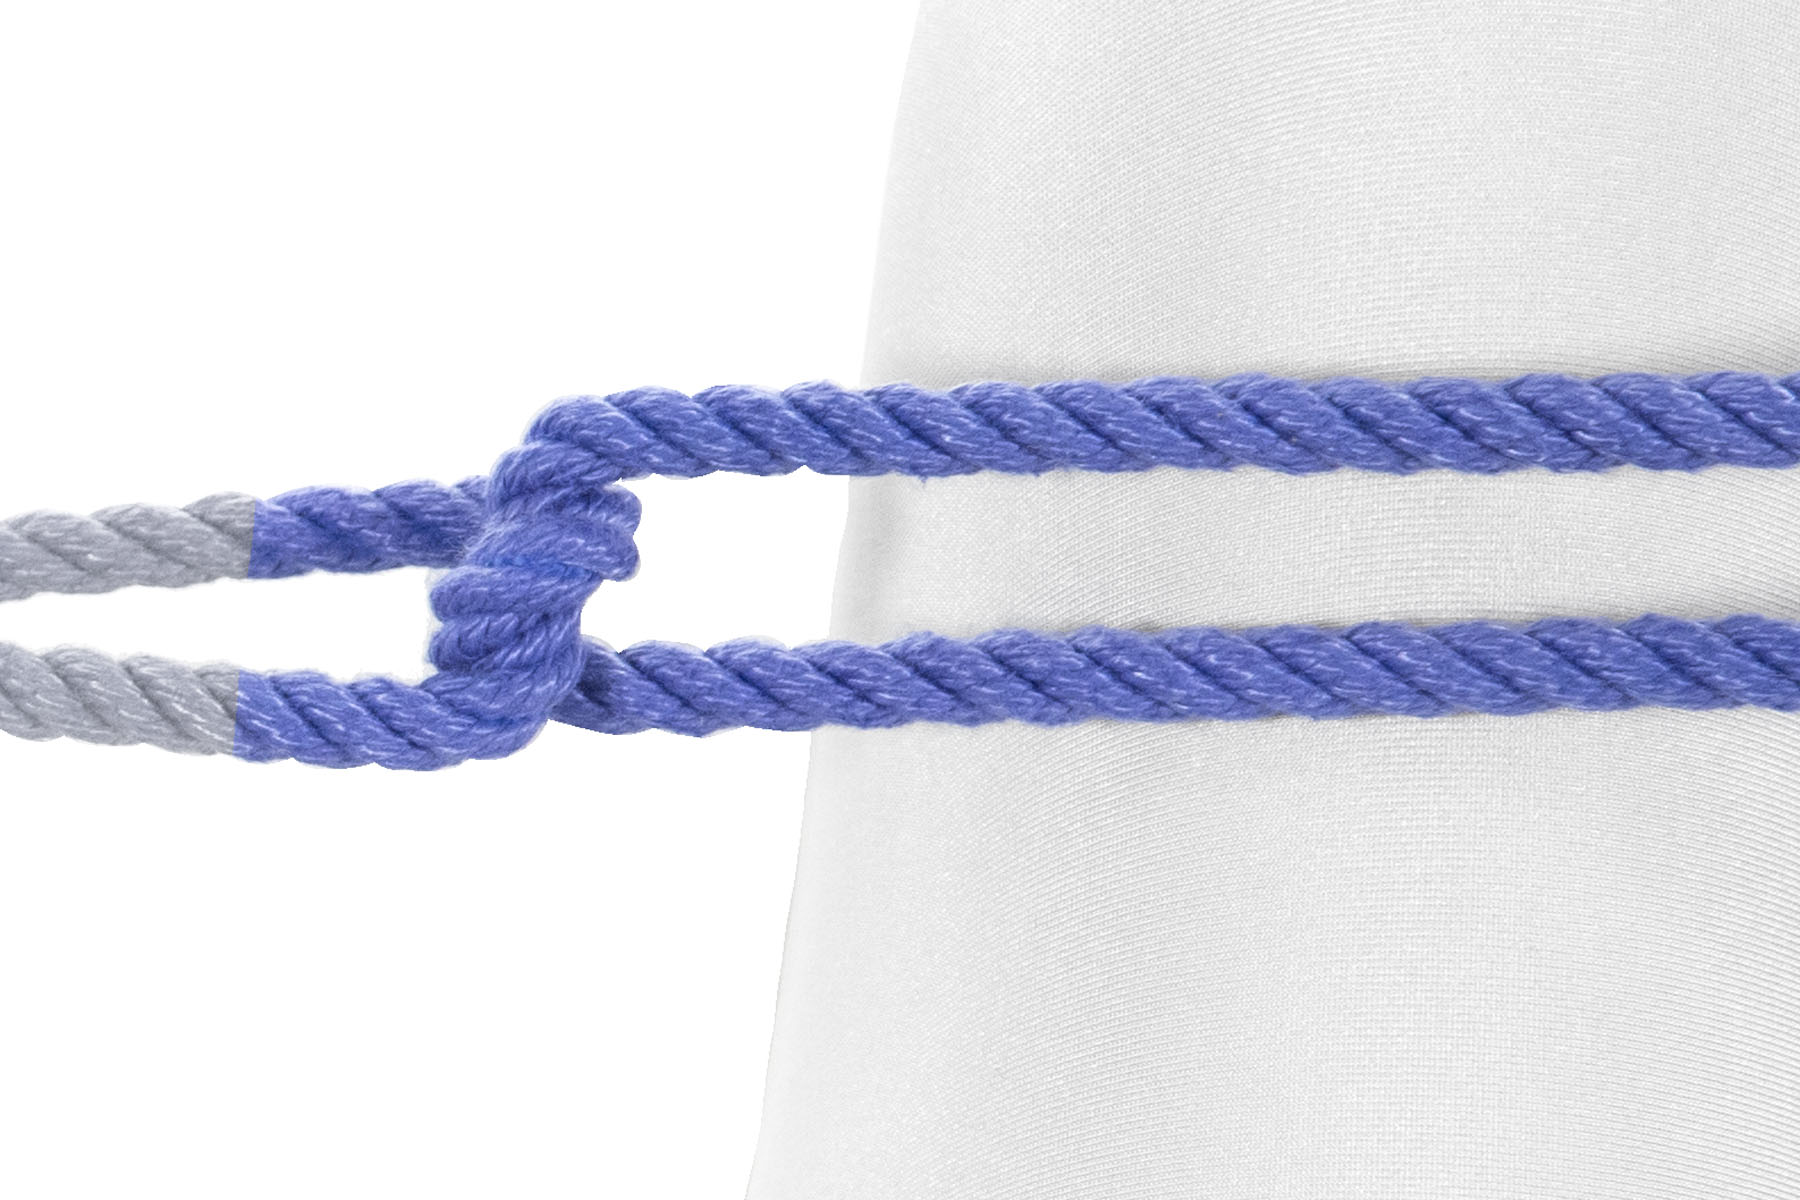 A closeup of the blue rope meeting the right leg. Just before it reaches the leg, the two parts of the rope separate slightly and are tied together with an overhand knot. They then continue to the right, lying on top of the right leg. The overhand knot makes a vertical twist that separates the two halves of the rope, about one inch to the left of the right leg.